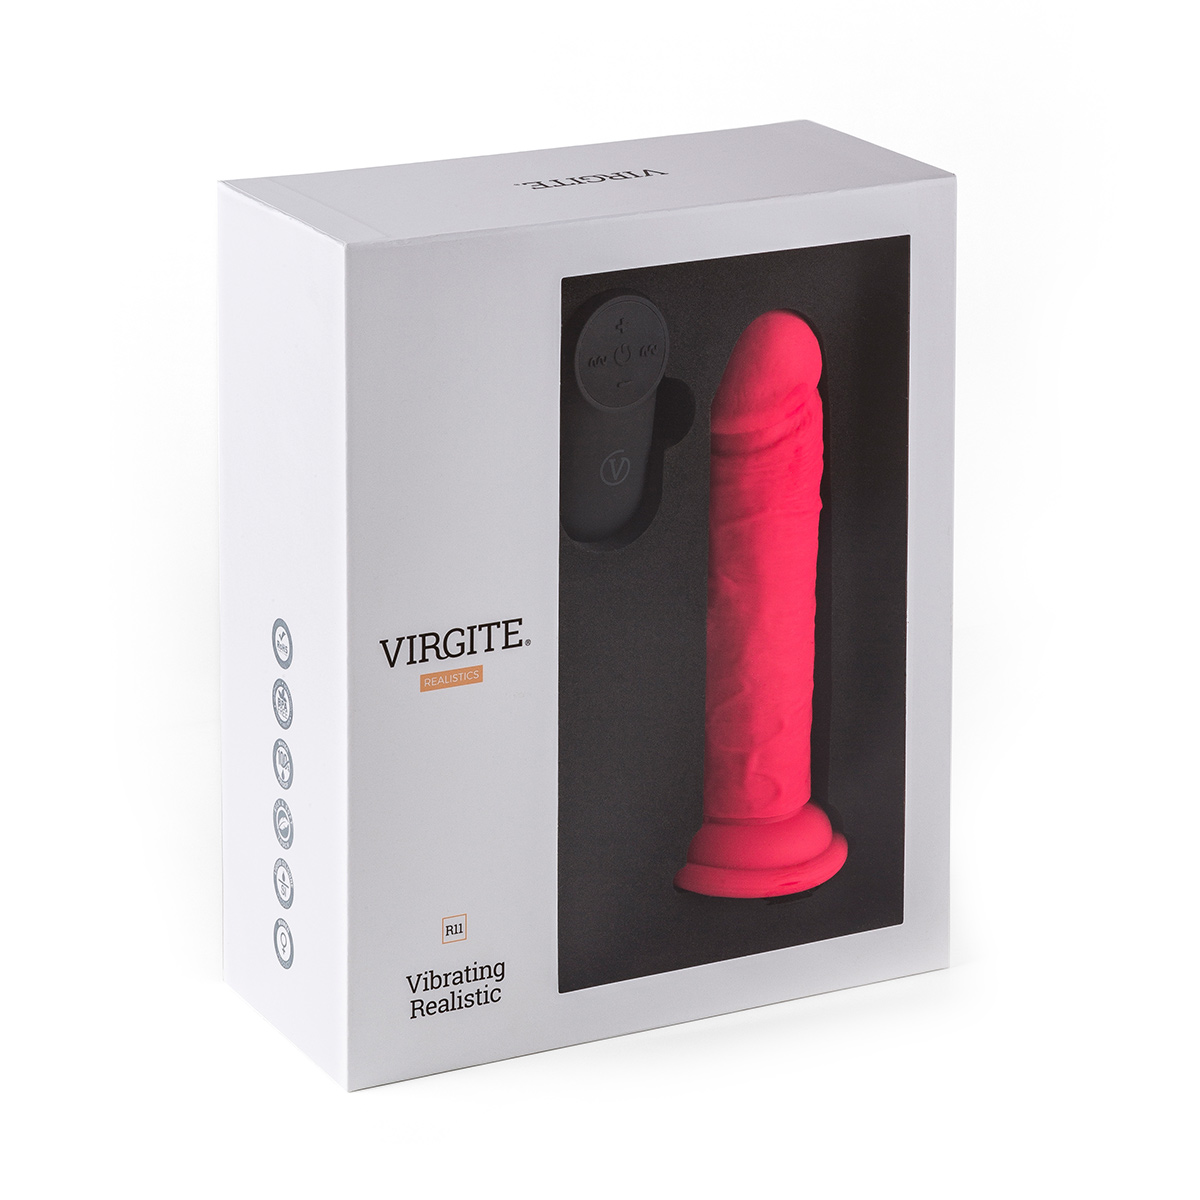 Vibrating-Realistic-with-Remote-R11-Pink-OPR-3090093-5